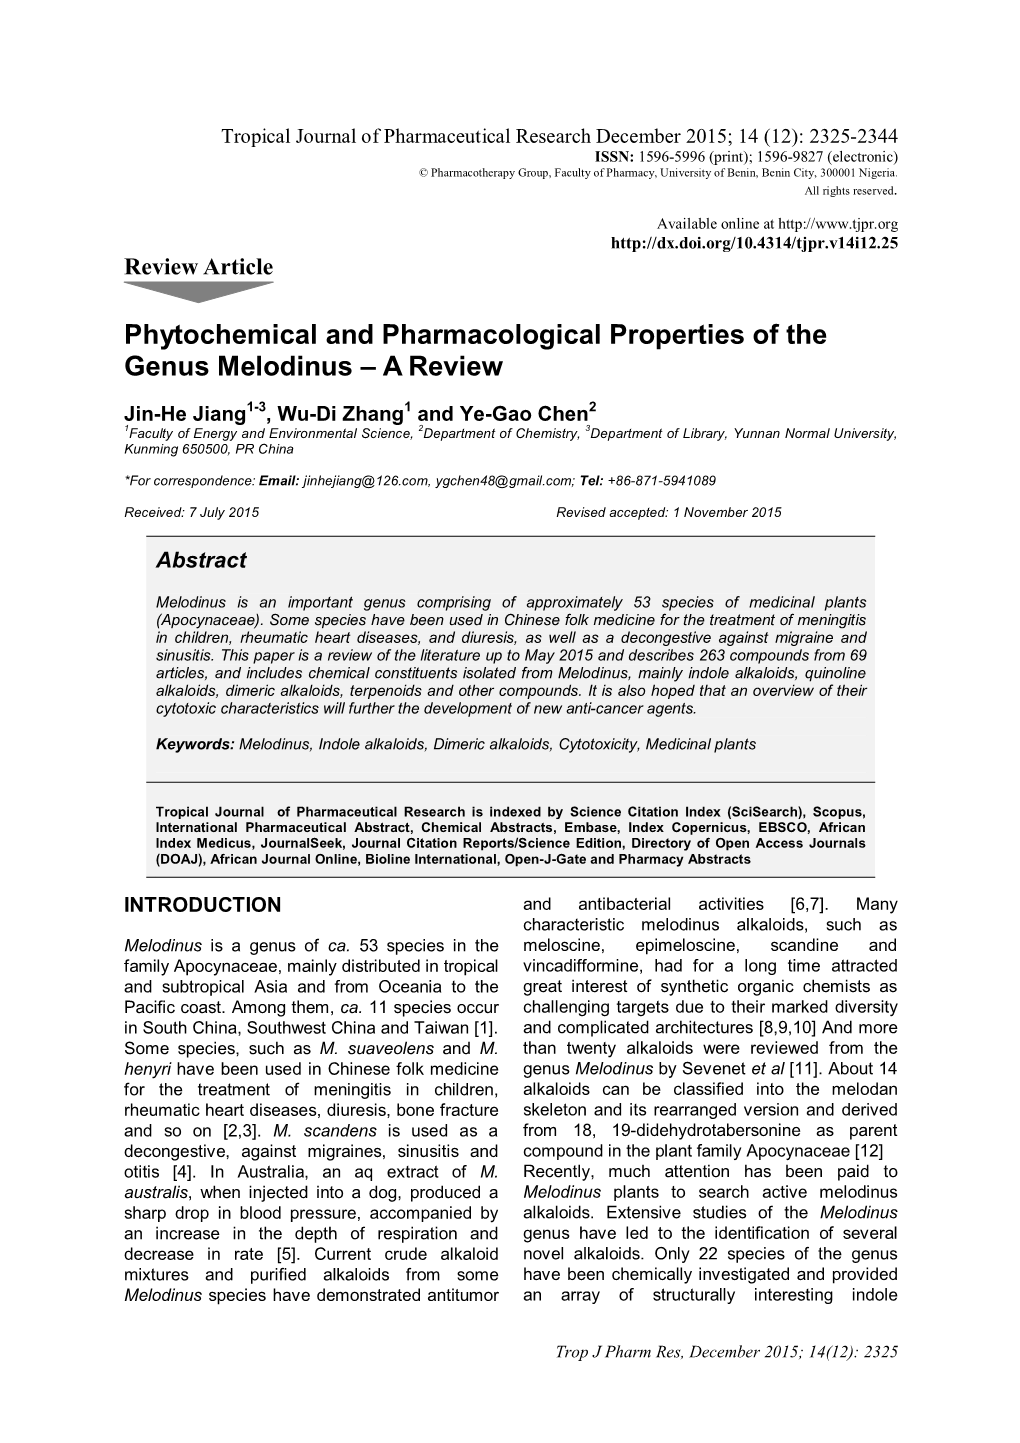 Phytochemical and Pharmacological Properties of the Genus Melodinus – a Review